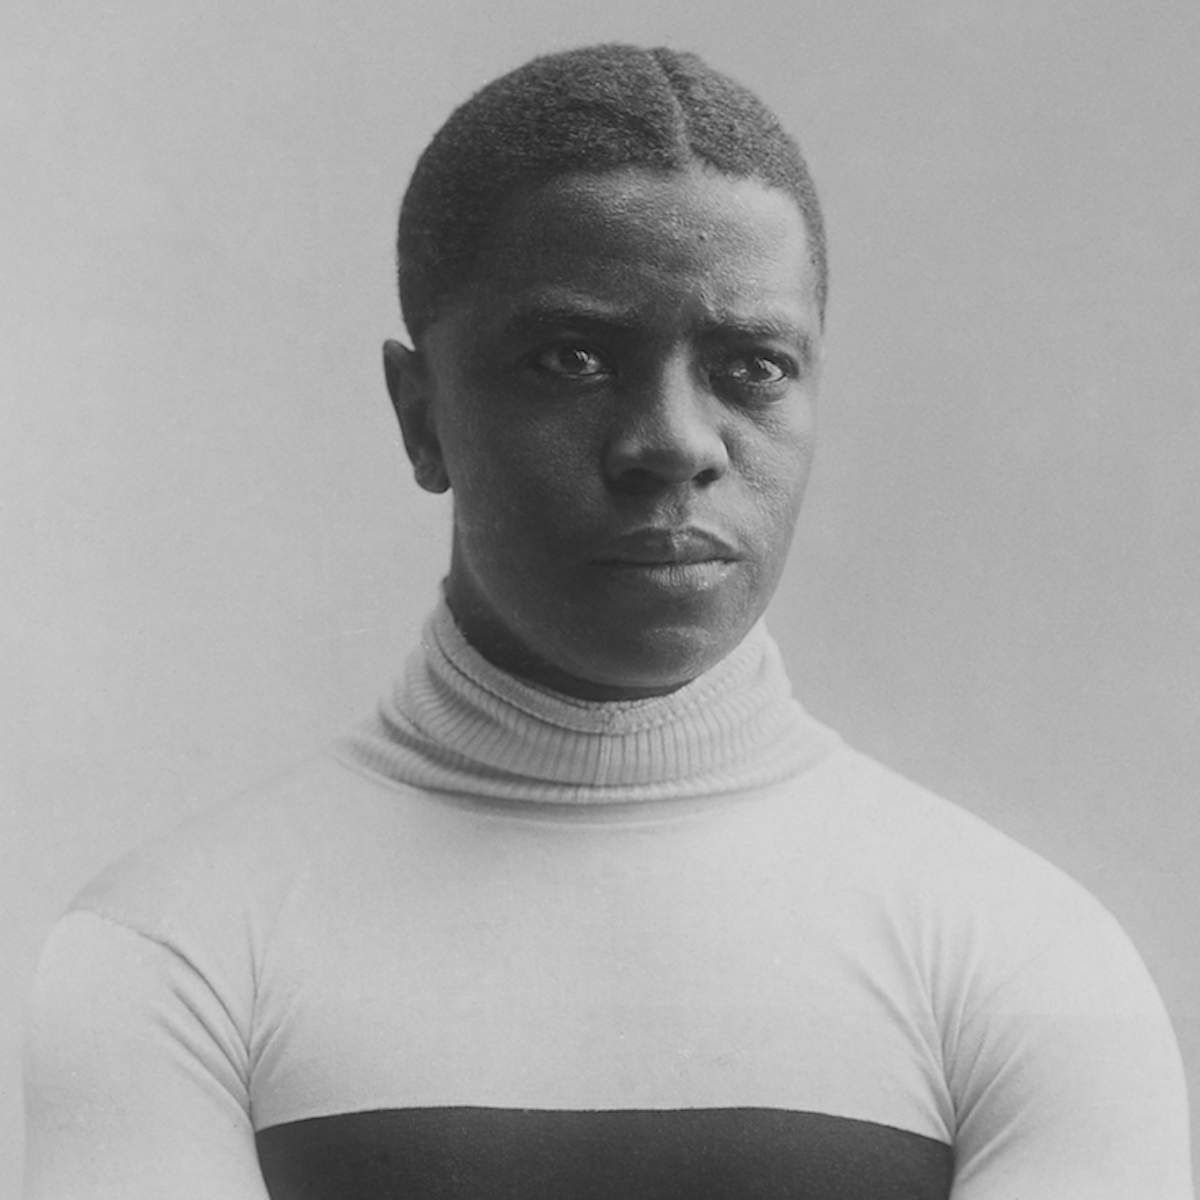 Before Jack Johnson or Jackie Robinson, there was Major Taylor | The Undefeated